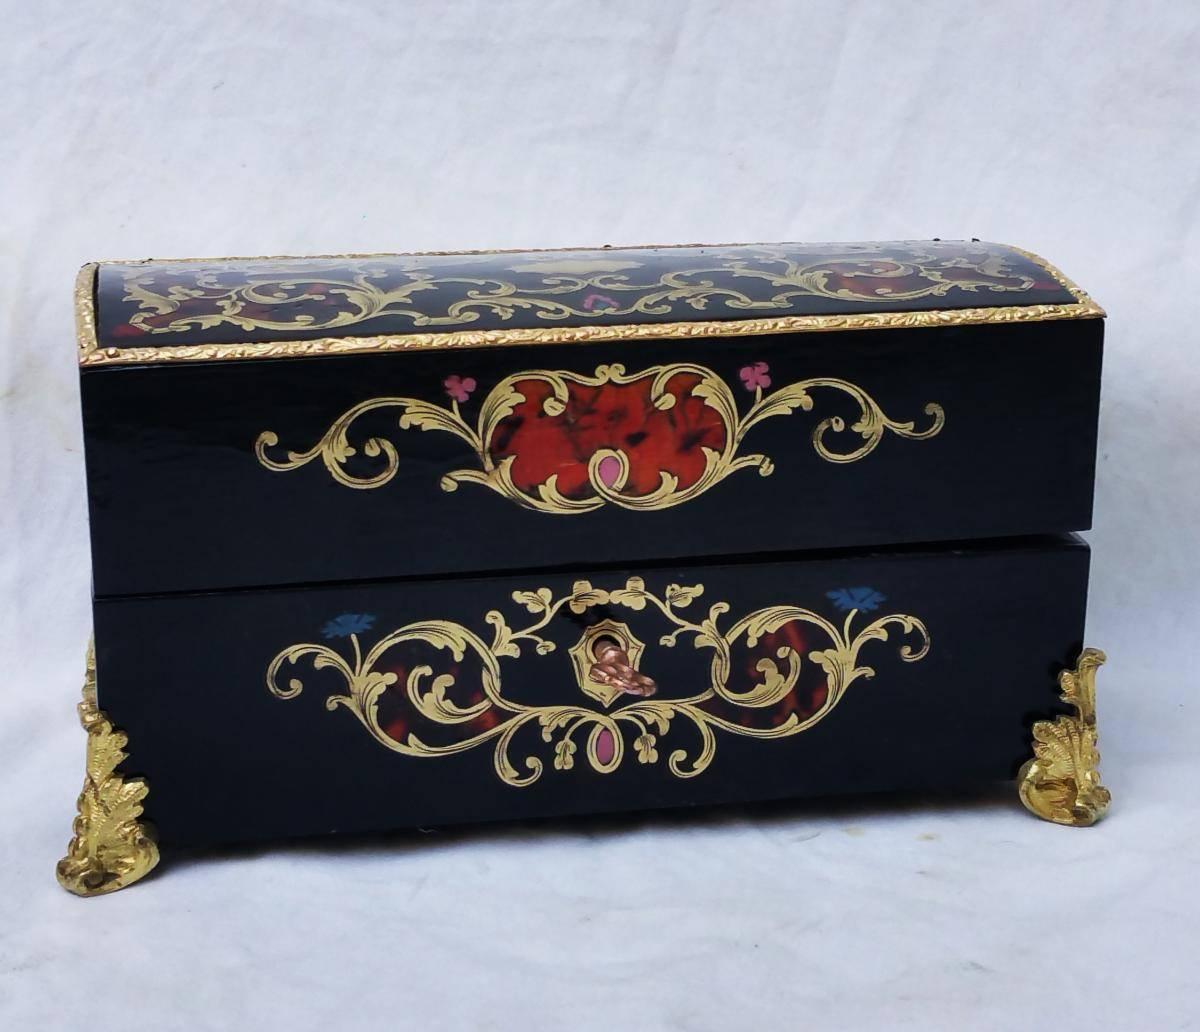 Rare perfume set in Boulle marquetry with five noble materials in Napoleon III style.
With its four original crystal perfume bottles.
Boulle style marquetry with inlays of brass, blue, rose and red bone and red horn.
Fine lingotière et resting on